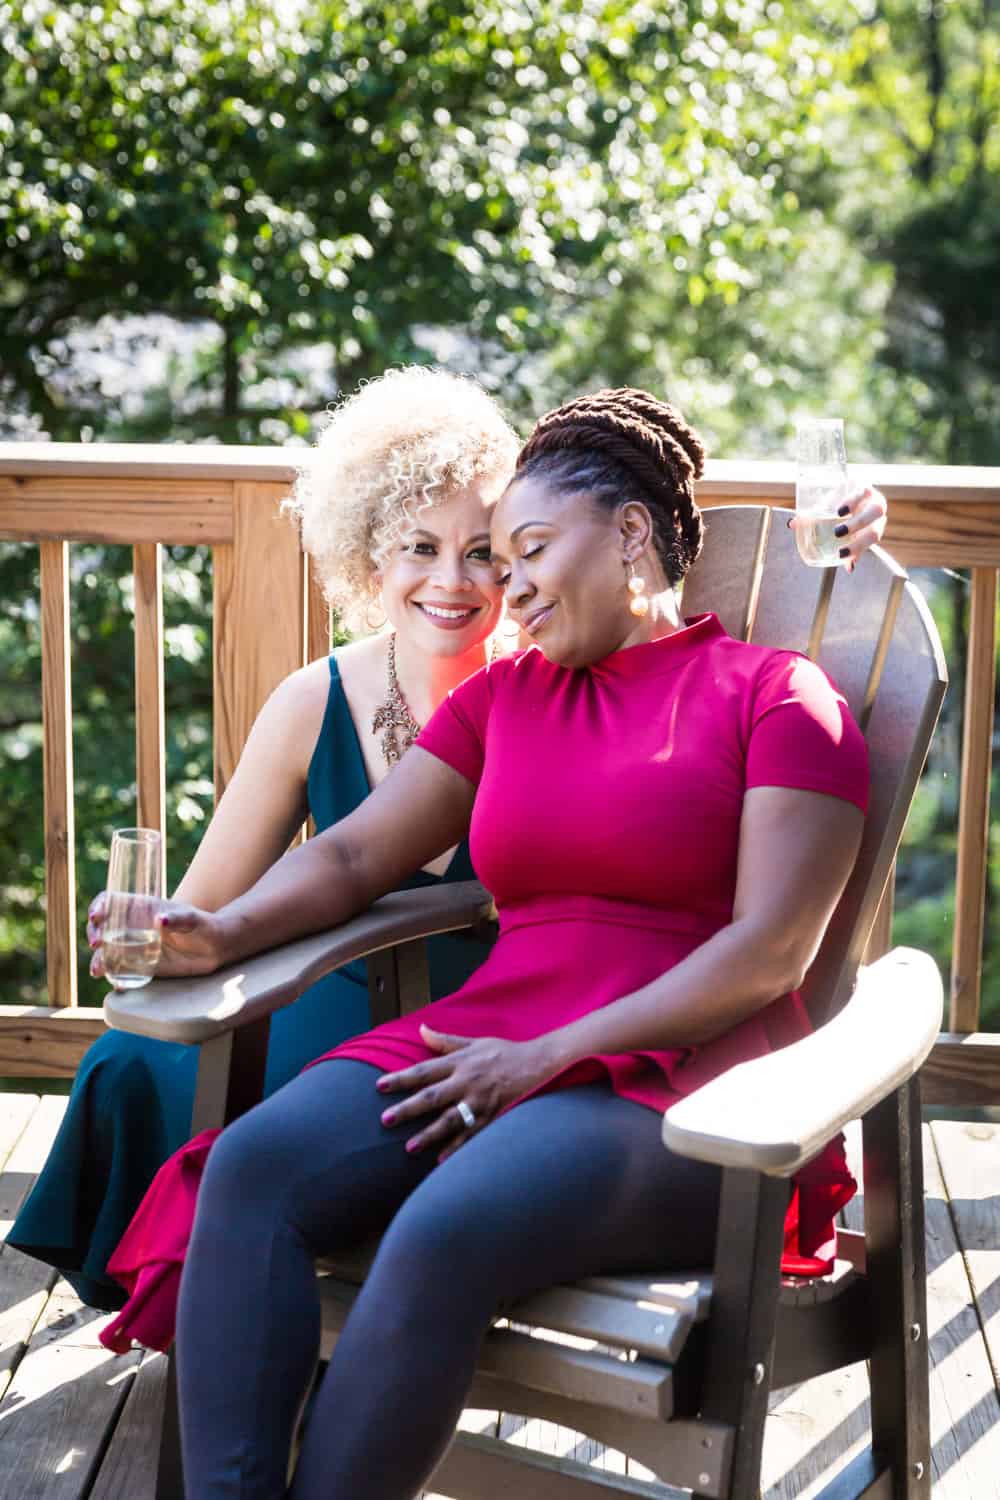 Two women cuddling on porch during a family reunion portrait